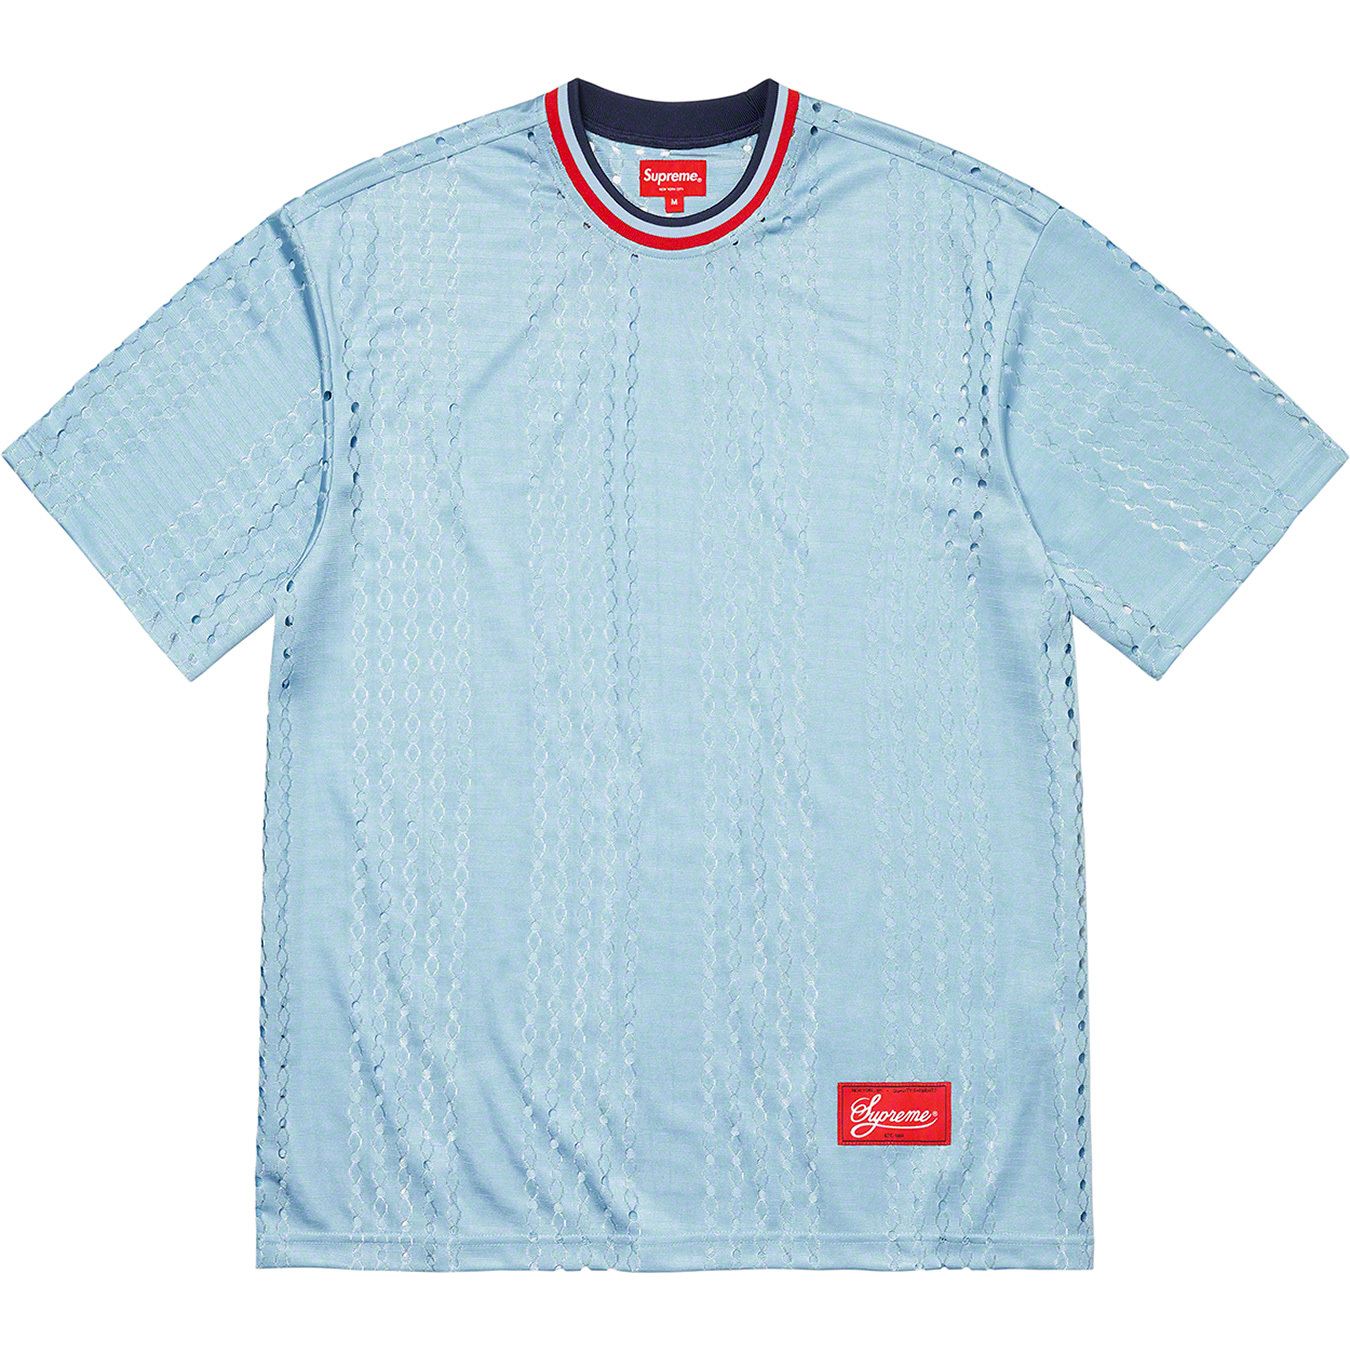 Perforated Stripe Warm Up Top | Supreme 22ss